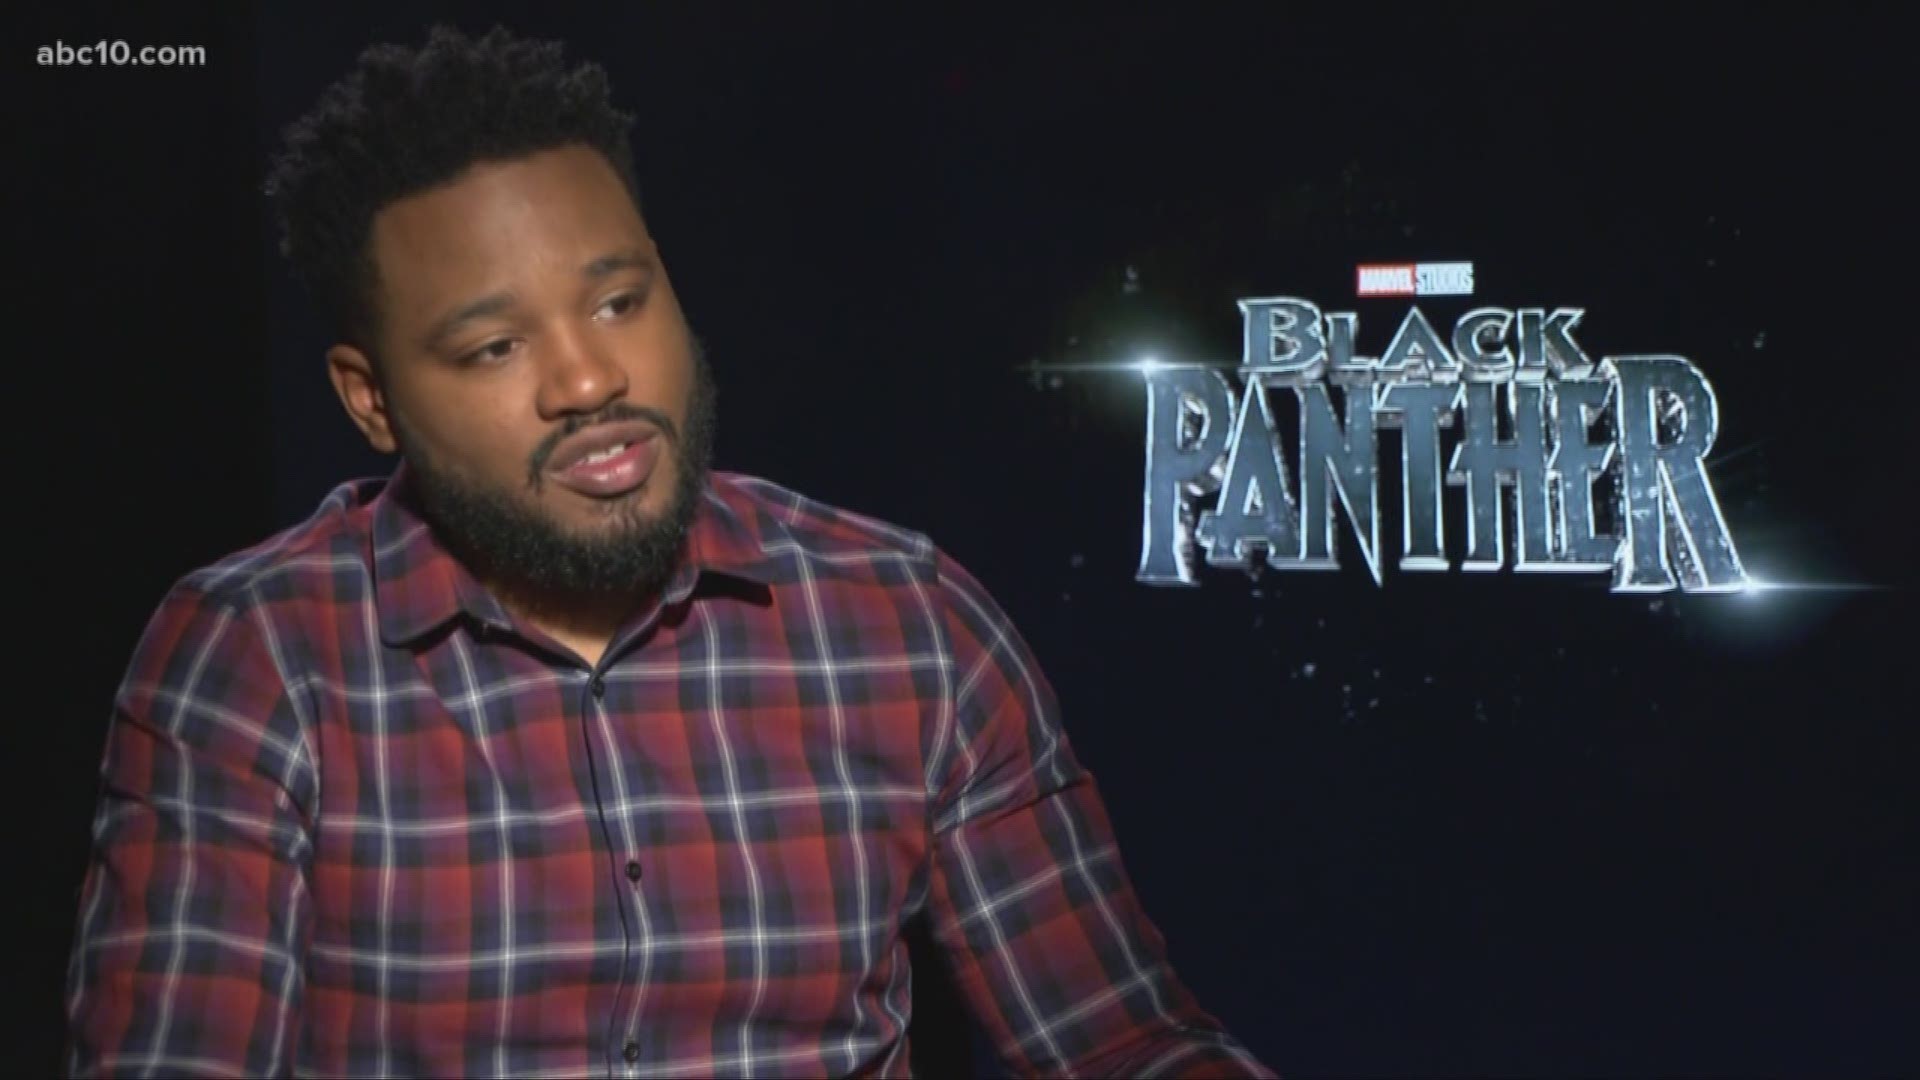 Mark S. Allen sat down with "Black Panther" director Ryan Coogler about the importance of the film.